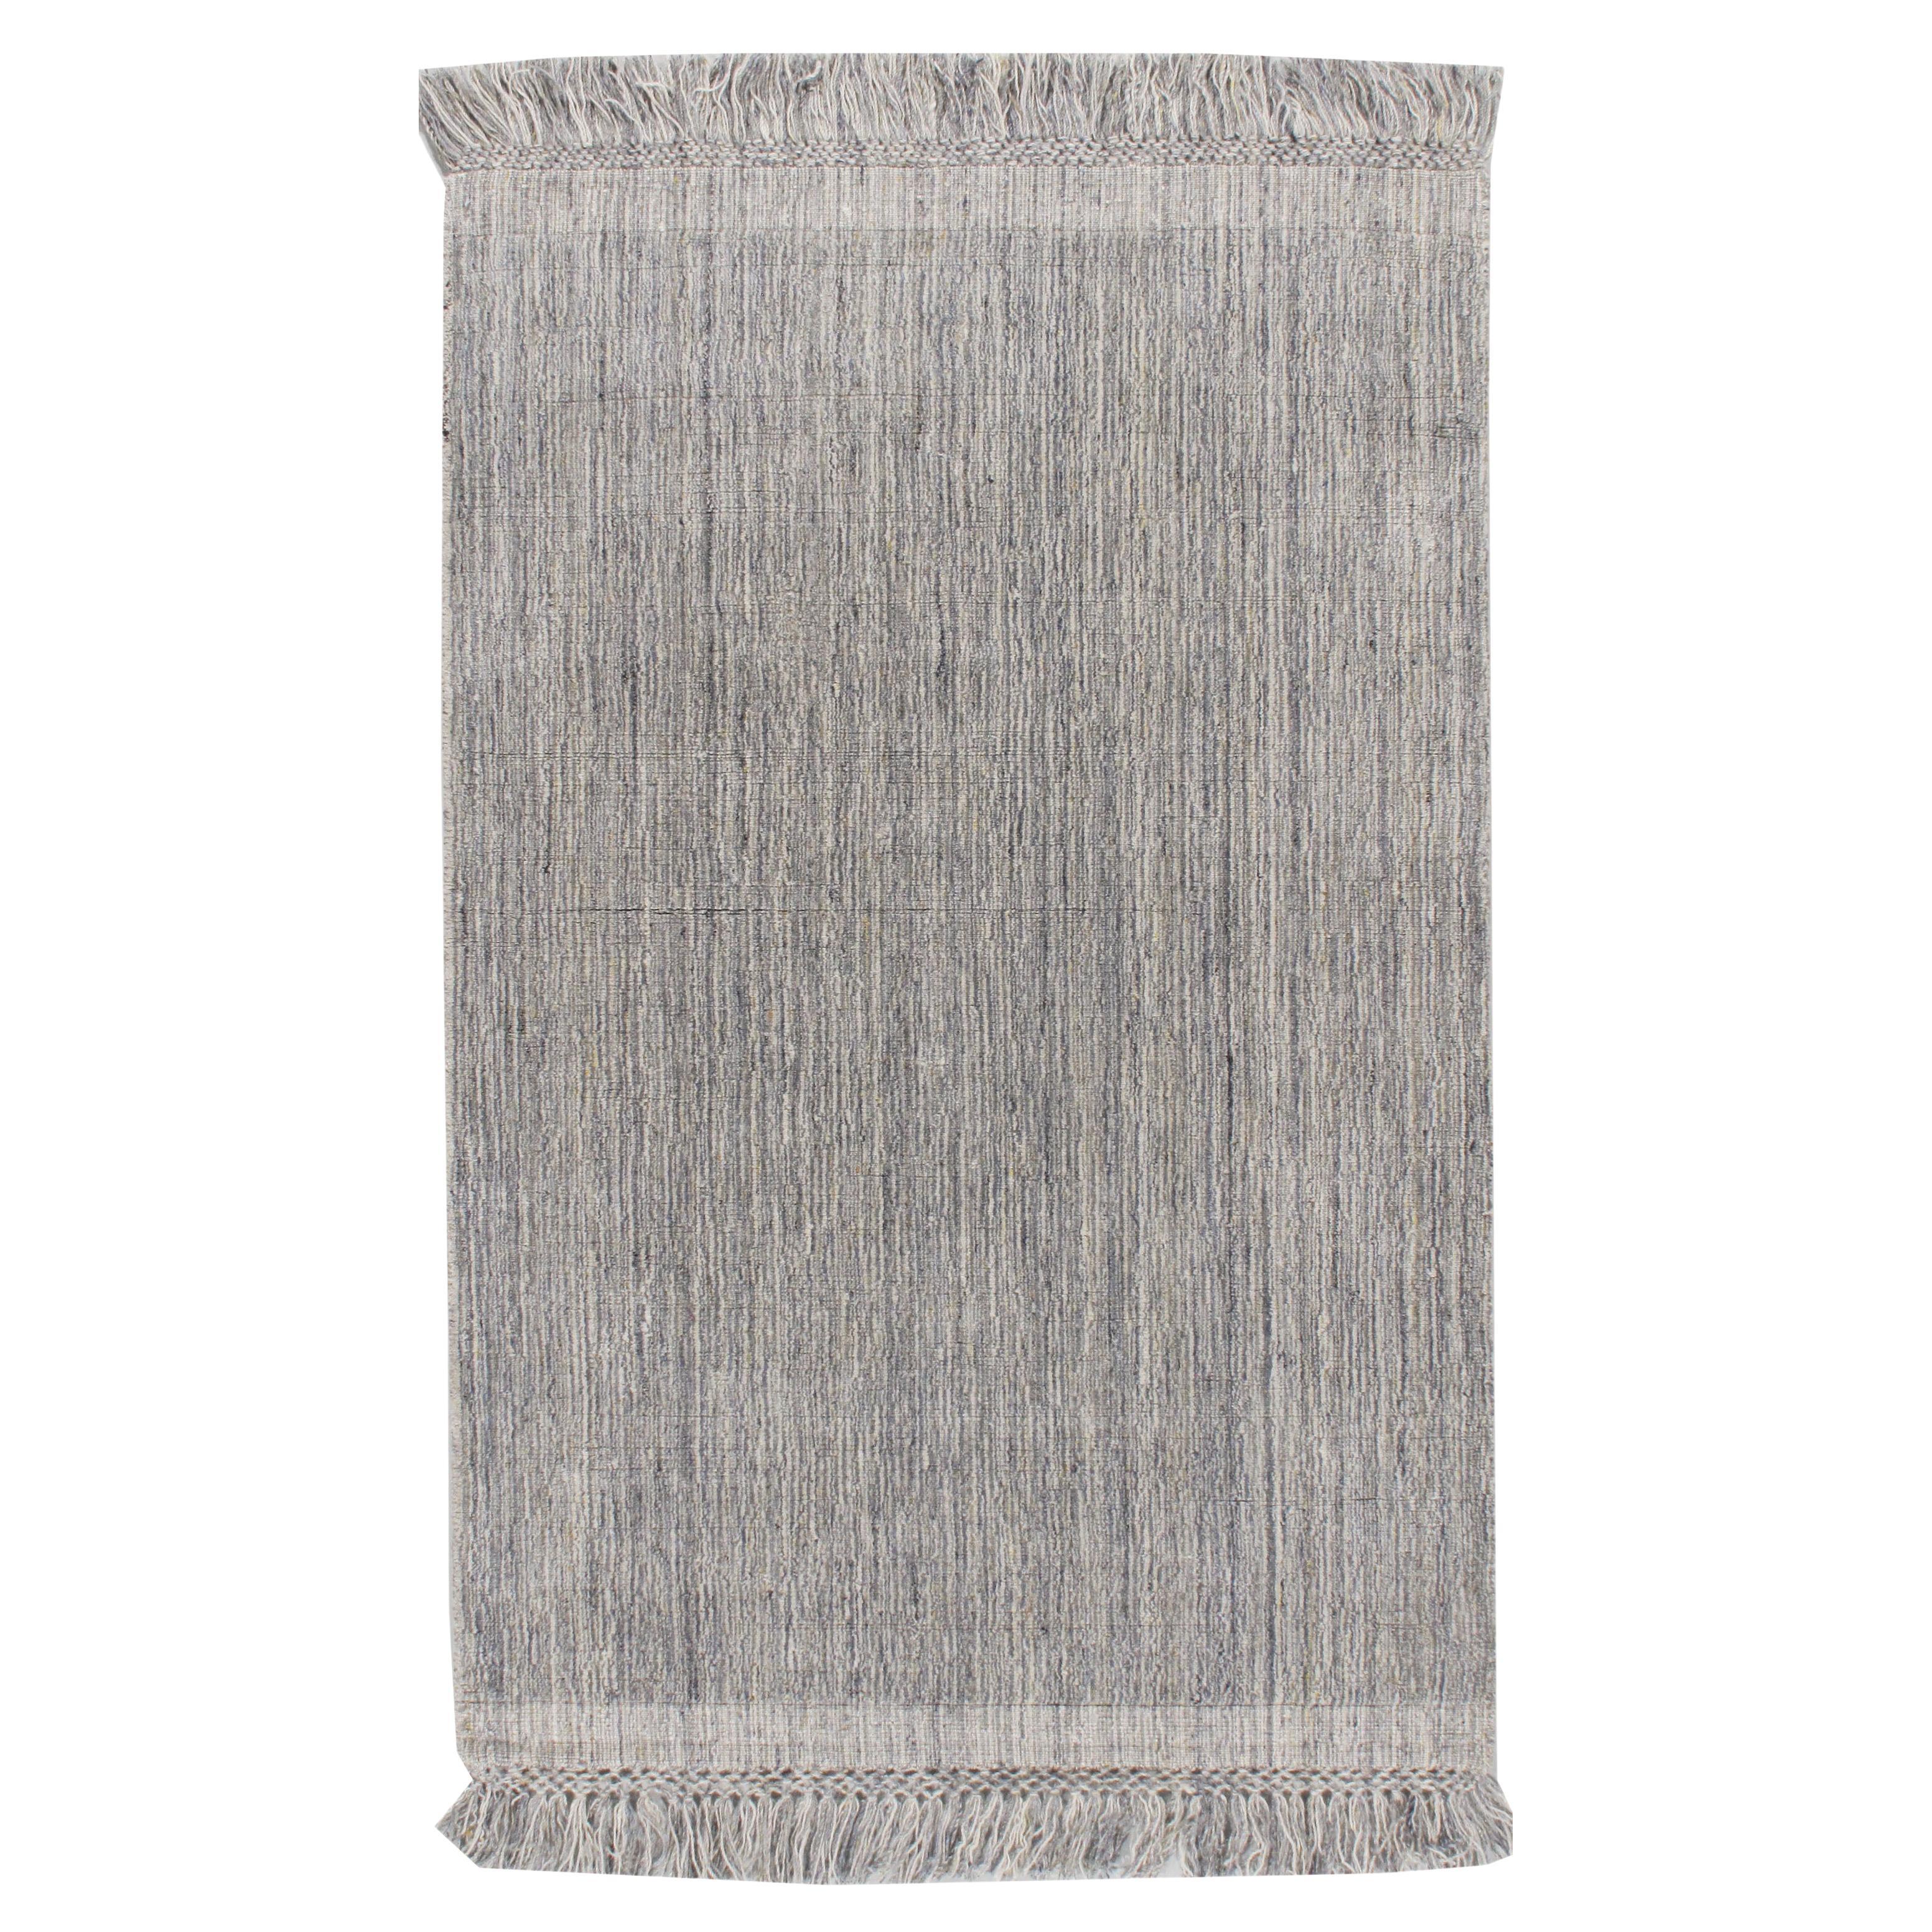 Contemporary Omni Rug Silver Charcoal Ivory  4' x 6'